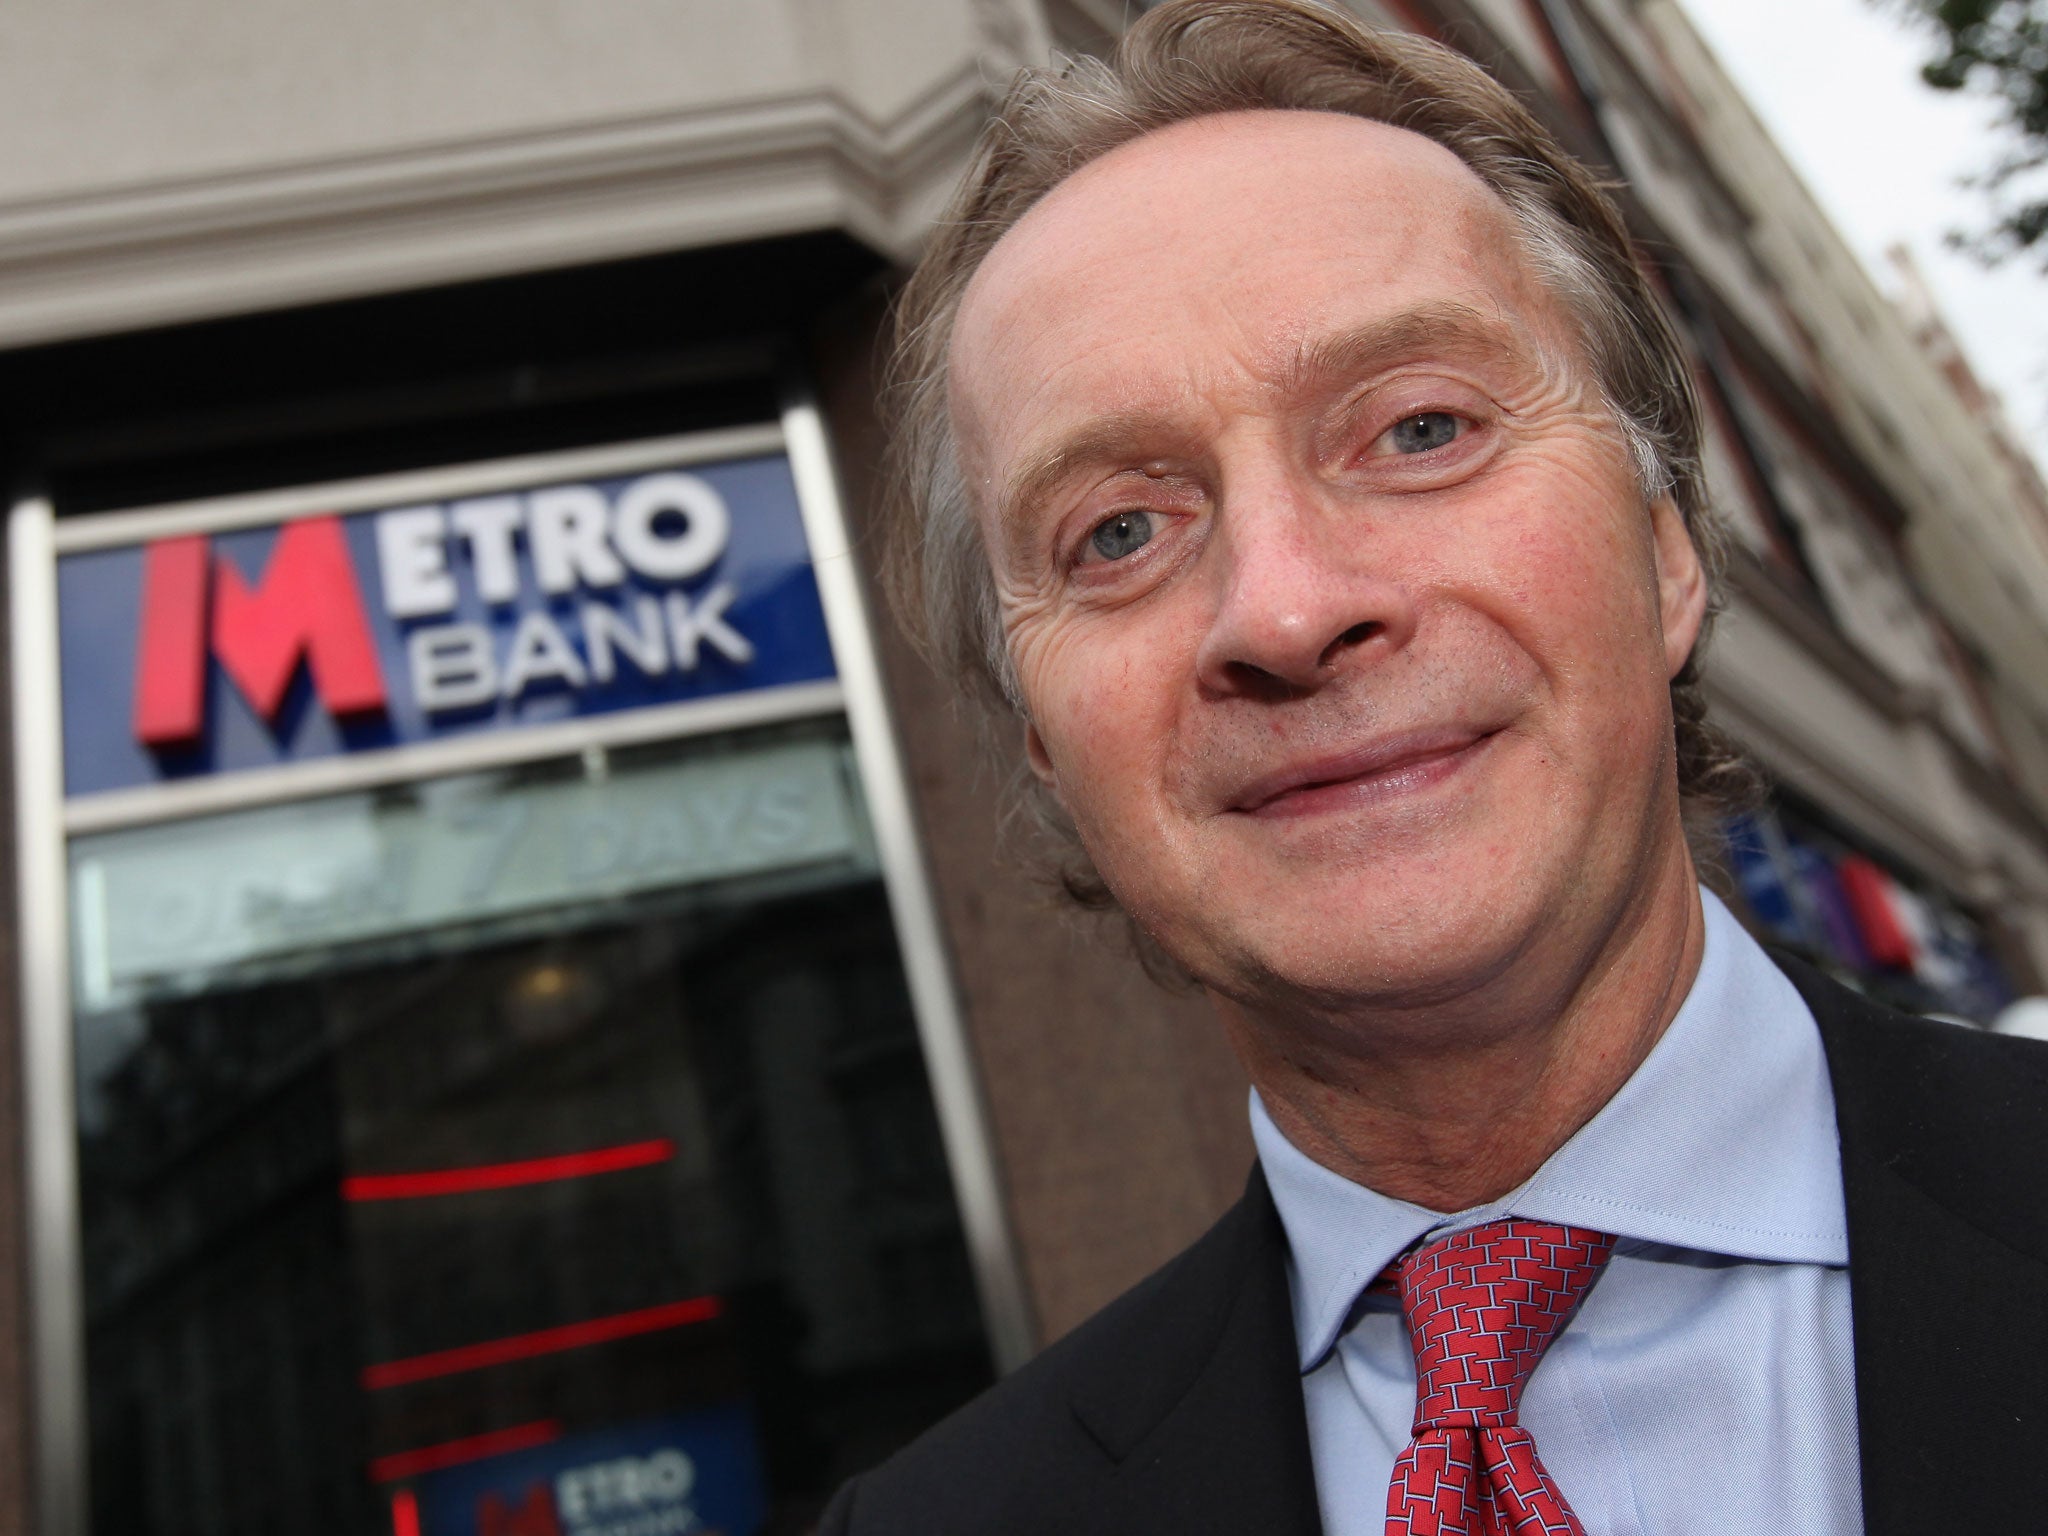 Anthony Thomson poses for a photo outside first branch of Metro Bank as it opens to the public in Holborn on July 29, 2010